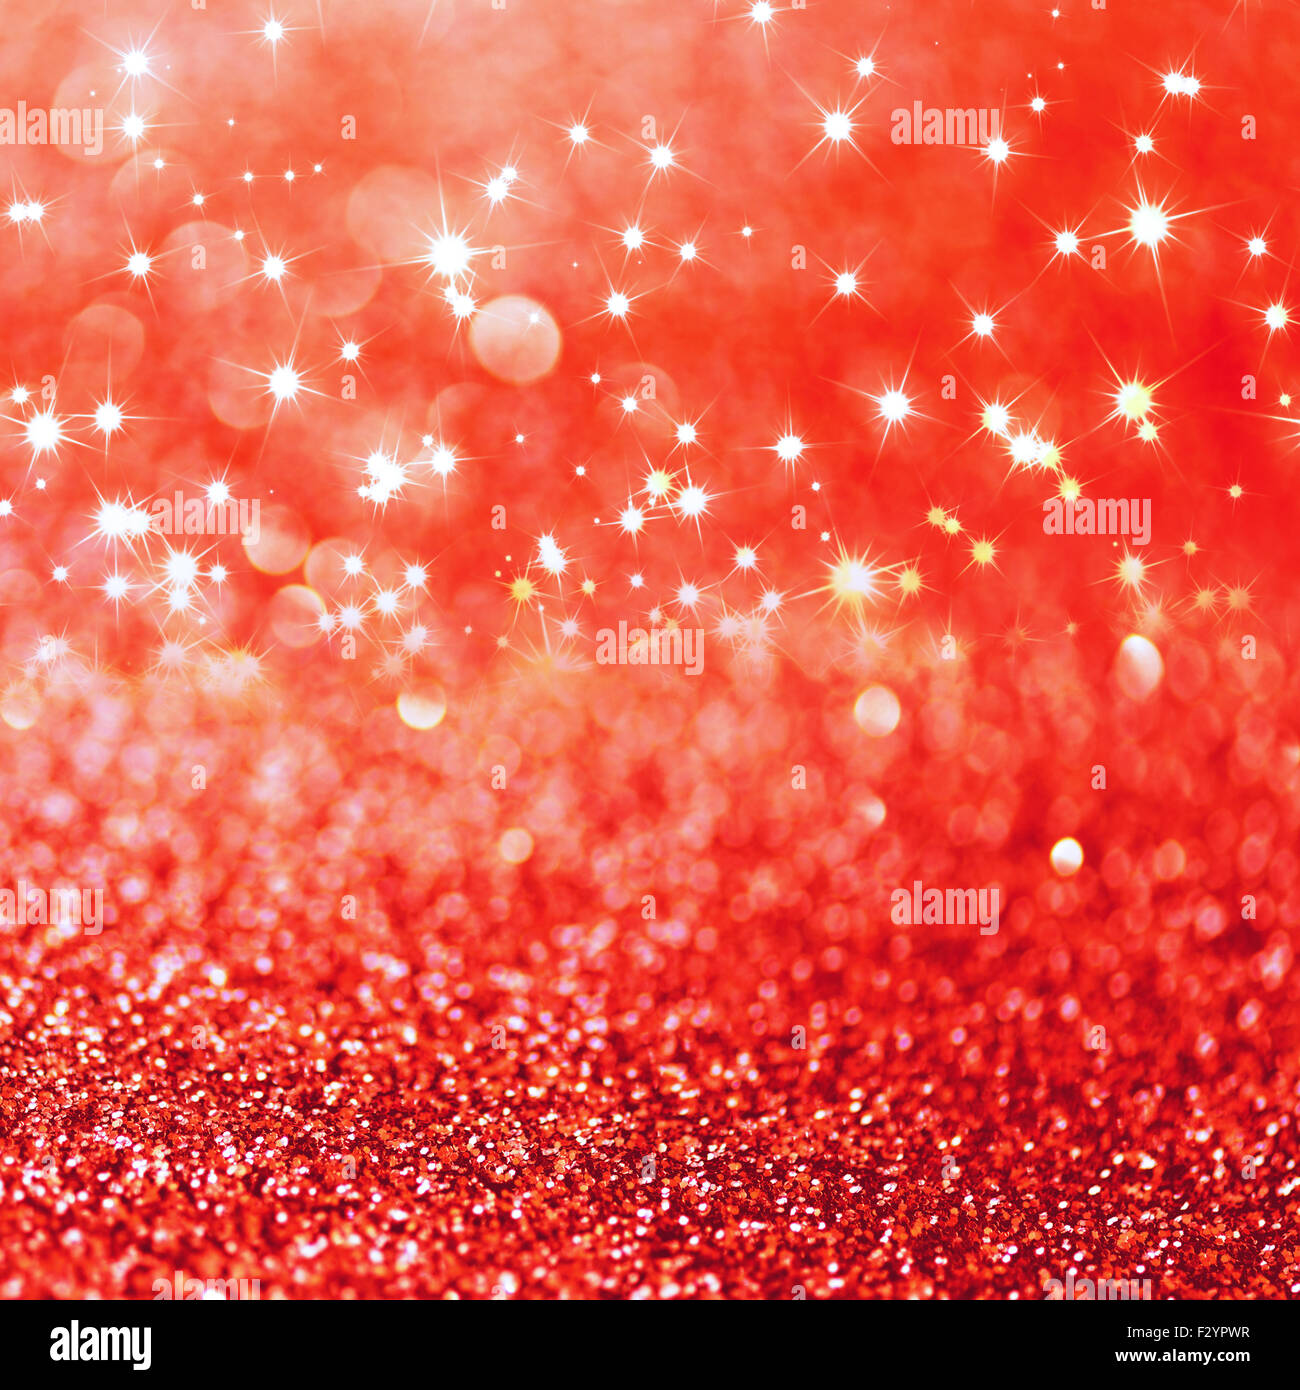 Red defocused glitter background with copy space Stock Photo